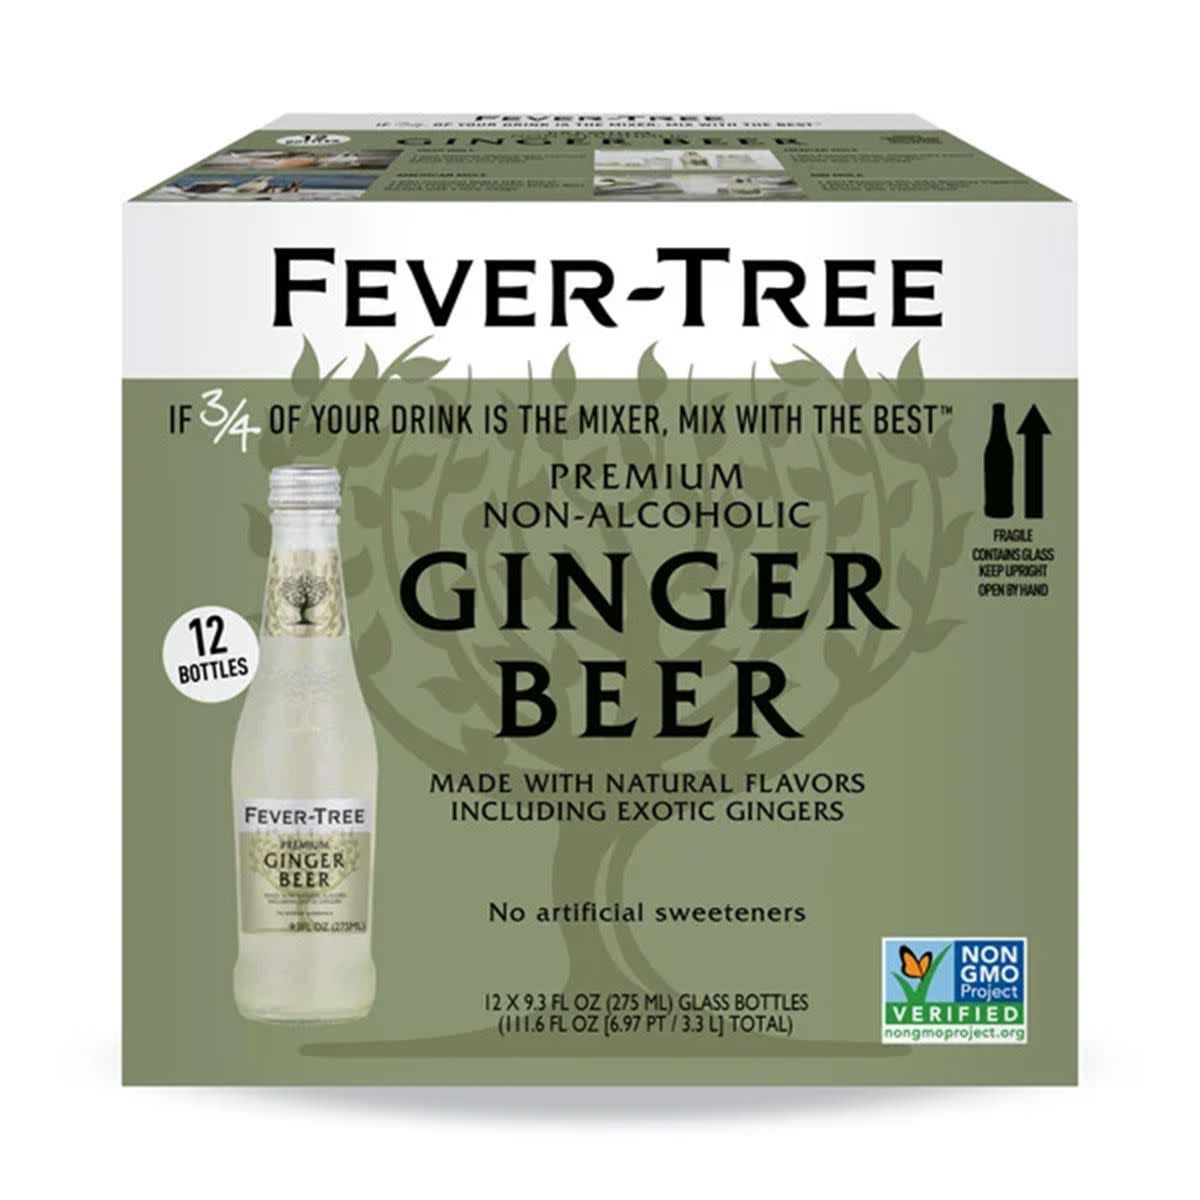 A 12-pack of Fever-Tree Ginger Beer against a white background